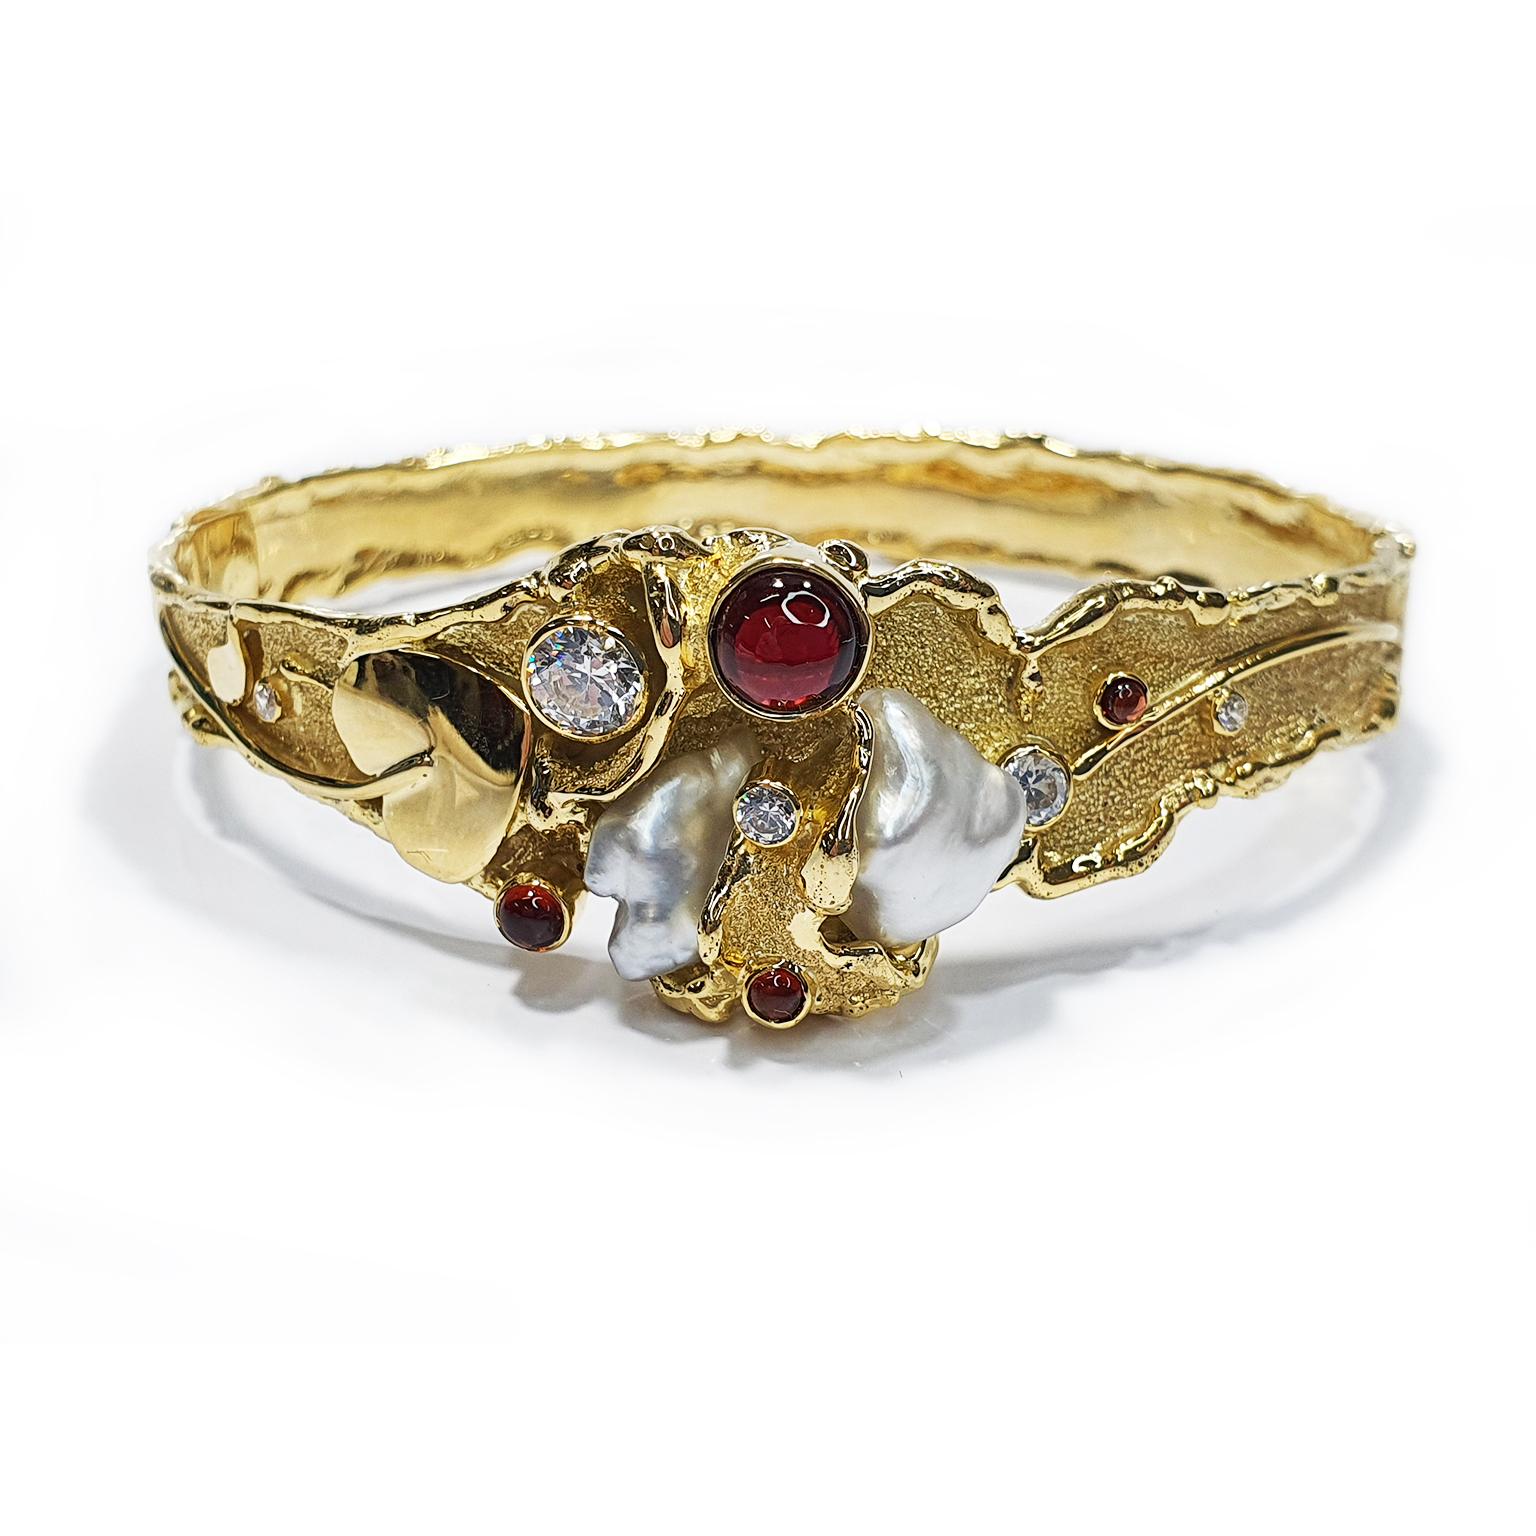 Paul Amey’s signature molten edge bangle is crafted from 9K yellow gold with garnets, leaf and vine motif and Keshi pearls. This molten edge garnet bangle contains a 12mm garnet cabochon, a 6mm garnet cabochon, a 4mm garnet cabochon and a 2.5mm